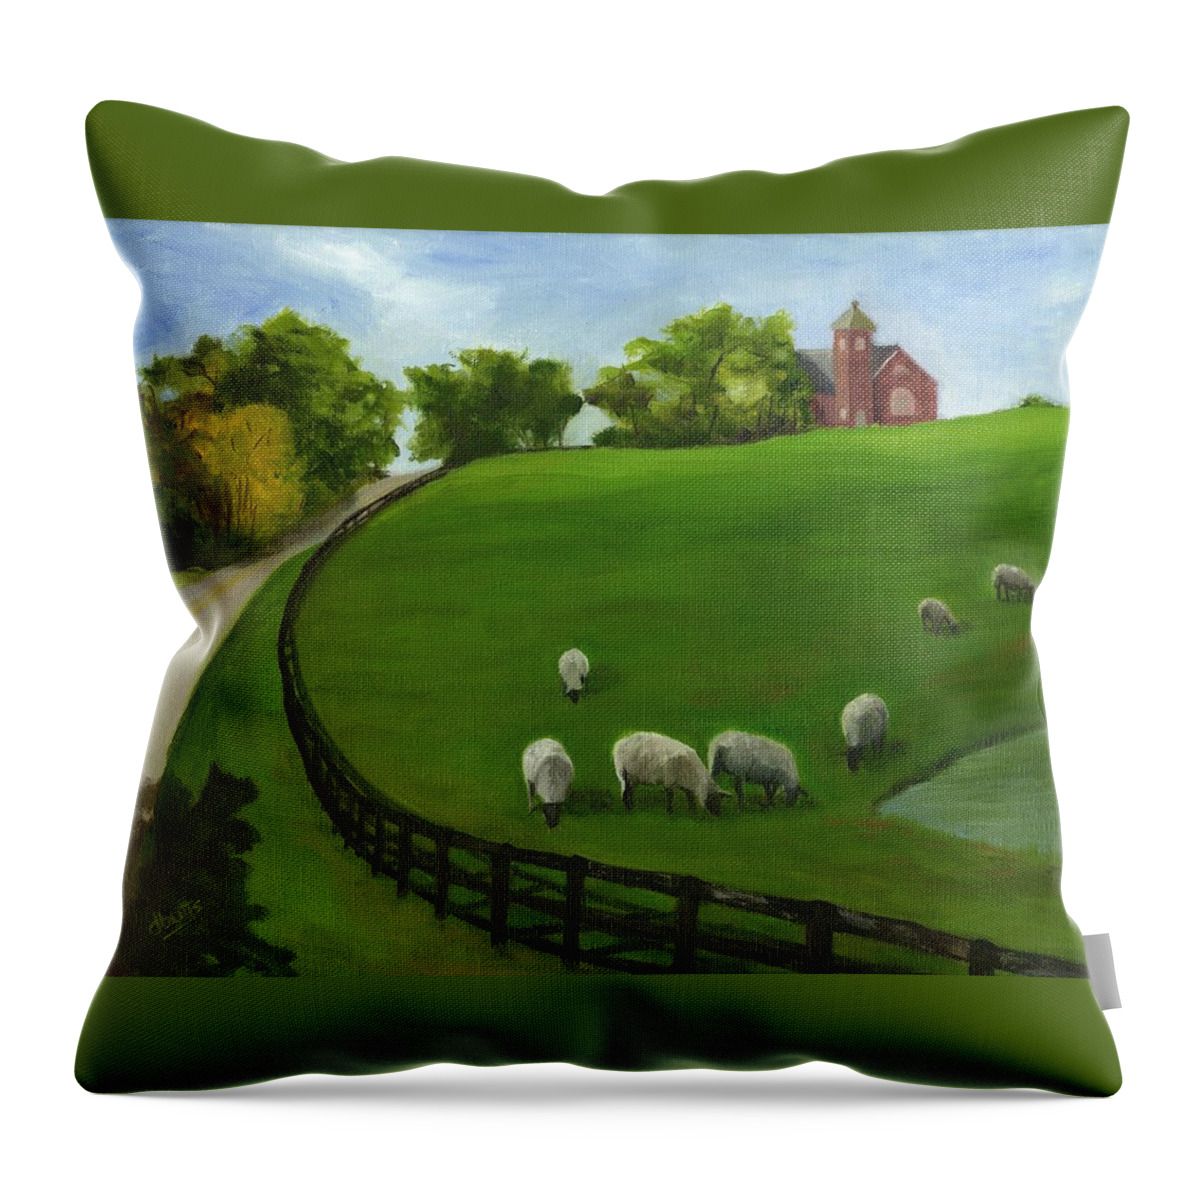 Farm Scenes. Pasture Scenes Throw Pillow featuring the painting Sheep May Safely Graze by Deborah Butts